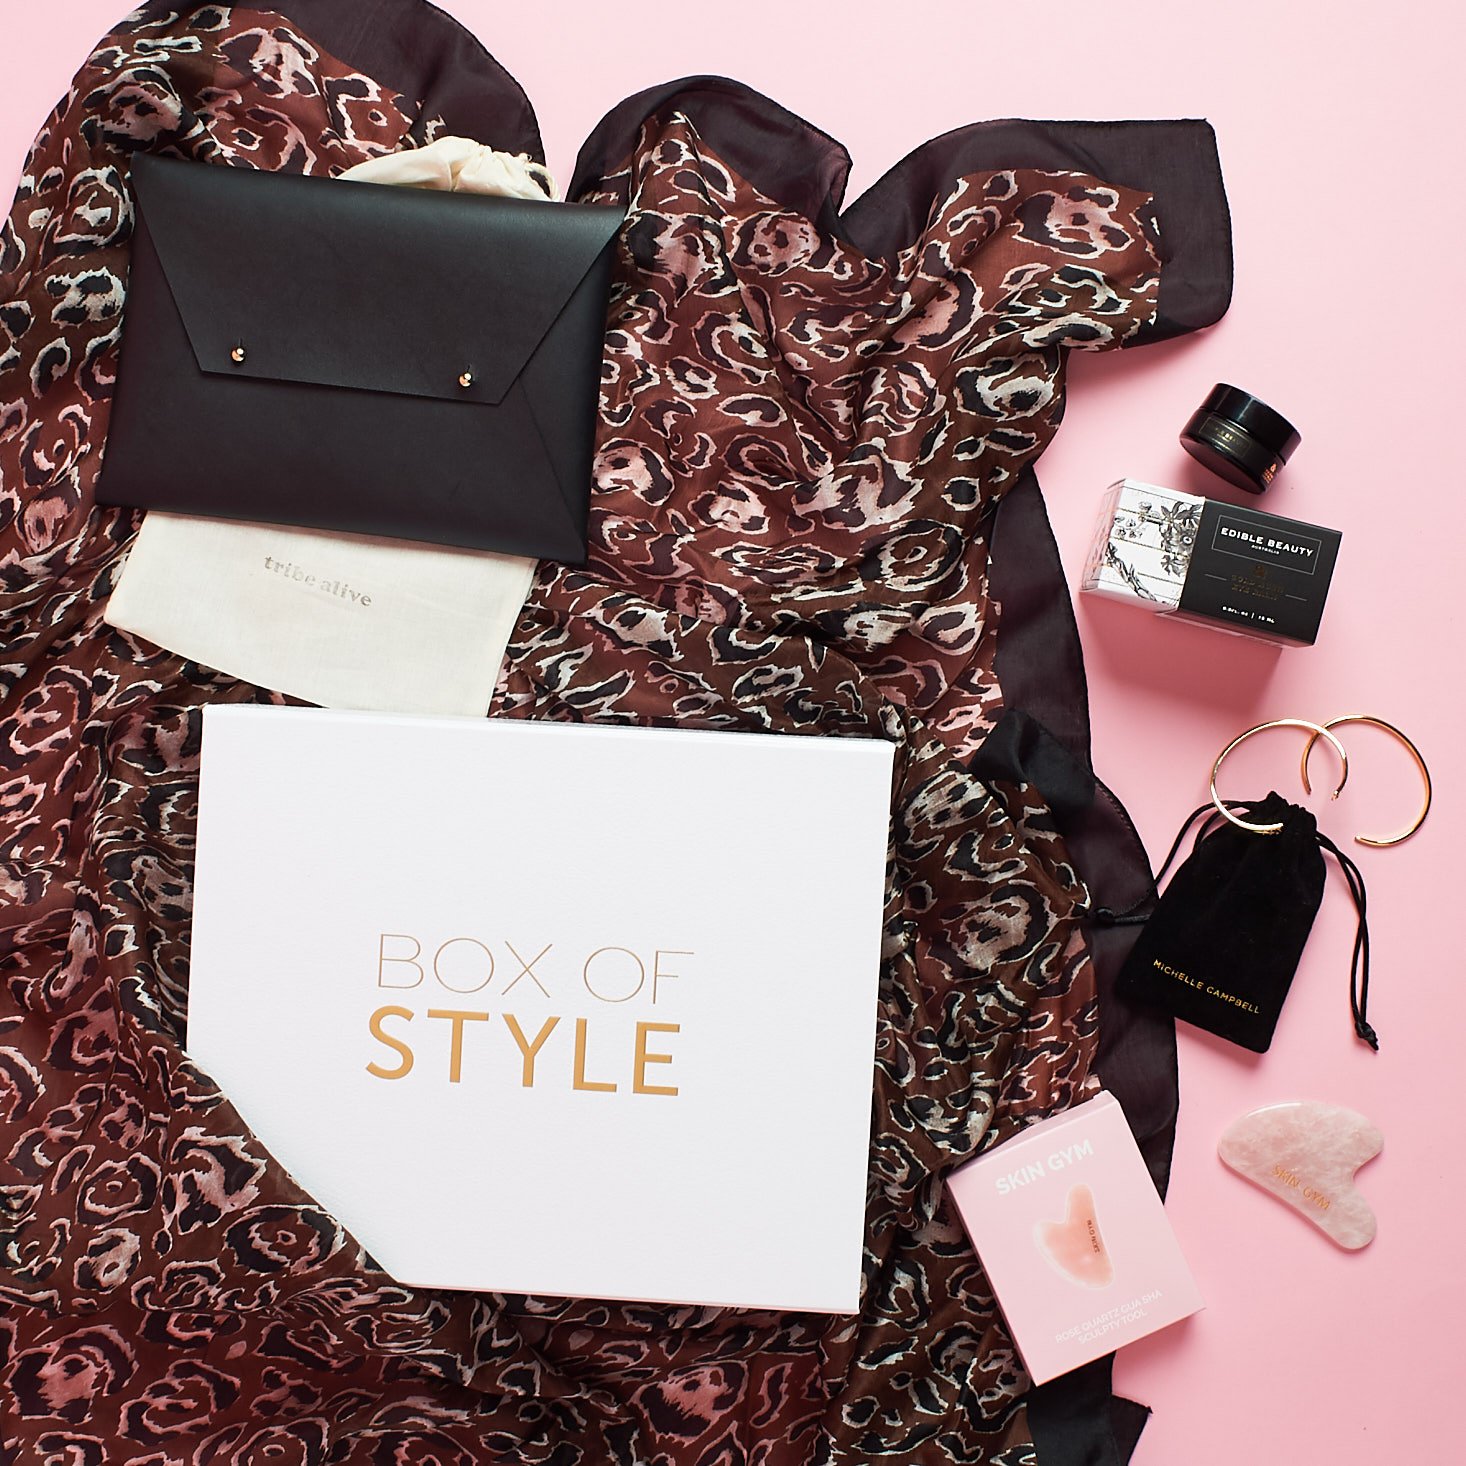 Rachel Zoe Box of Style Spring 2019 Review + $25 Coupon